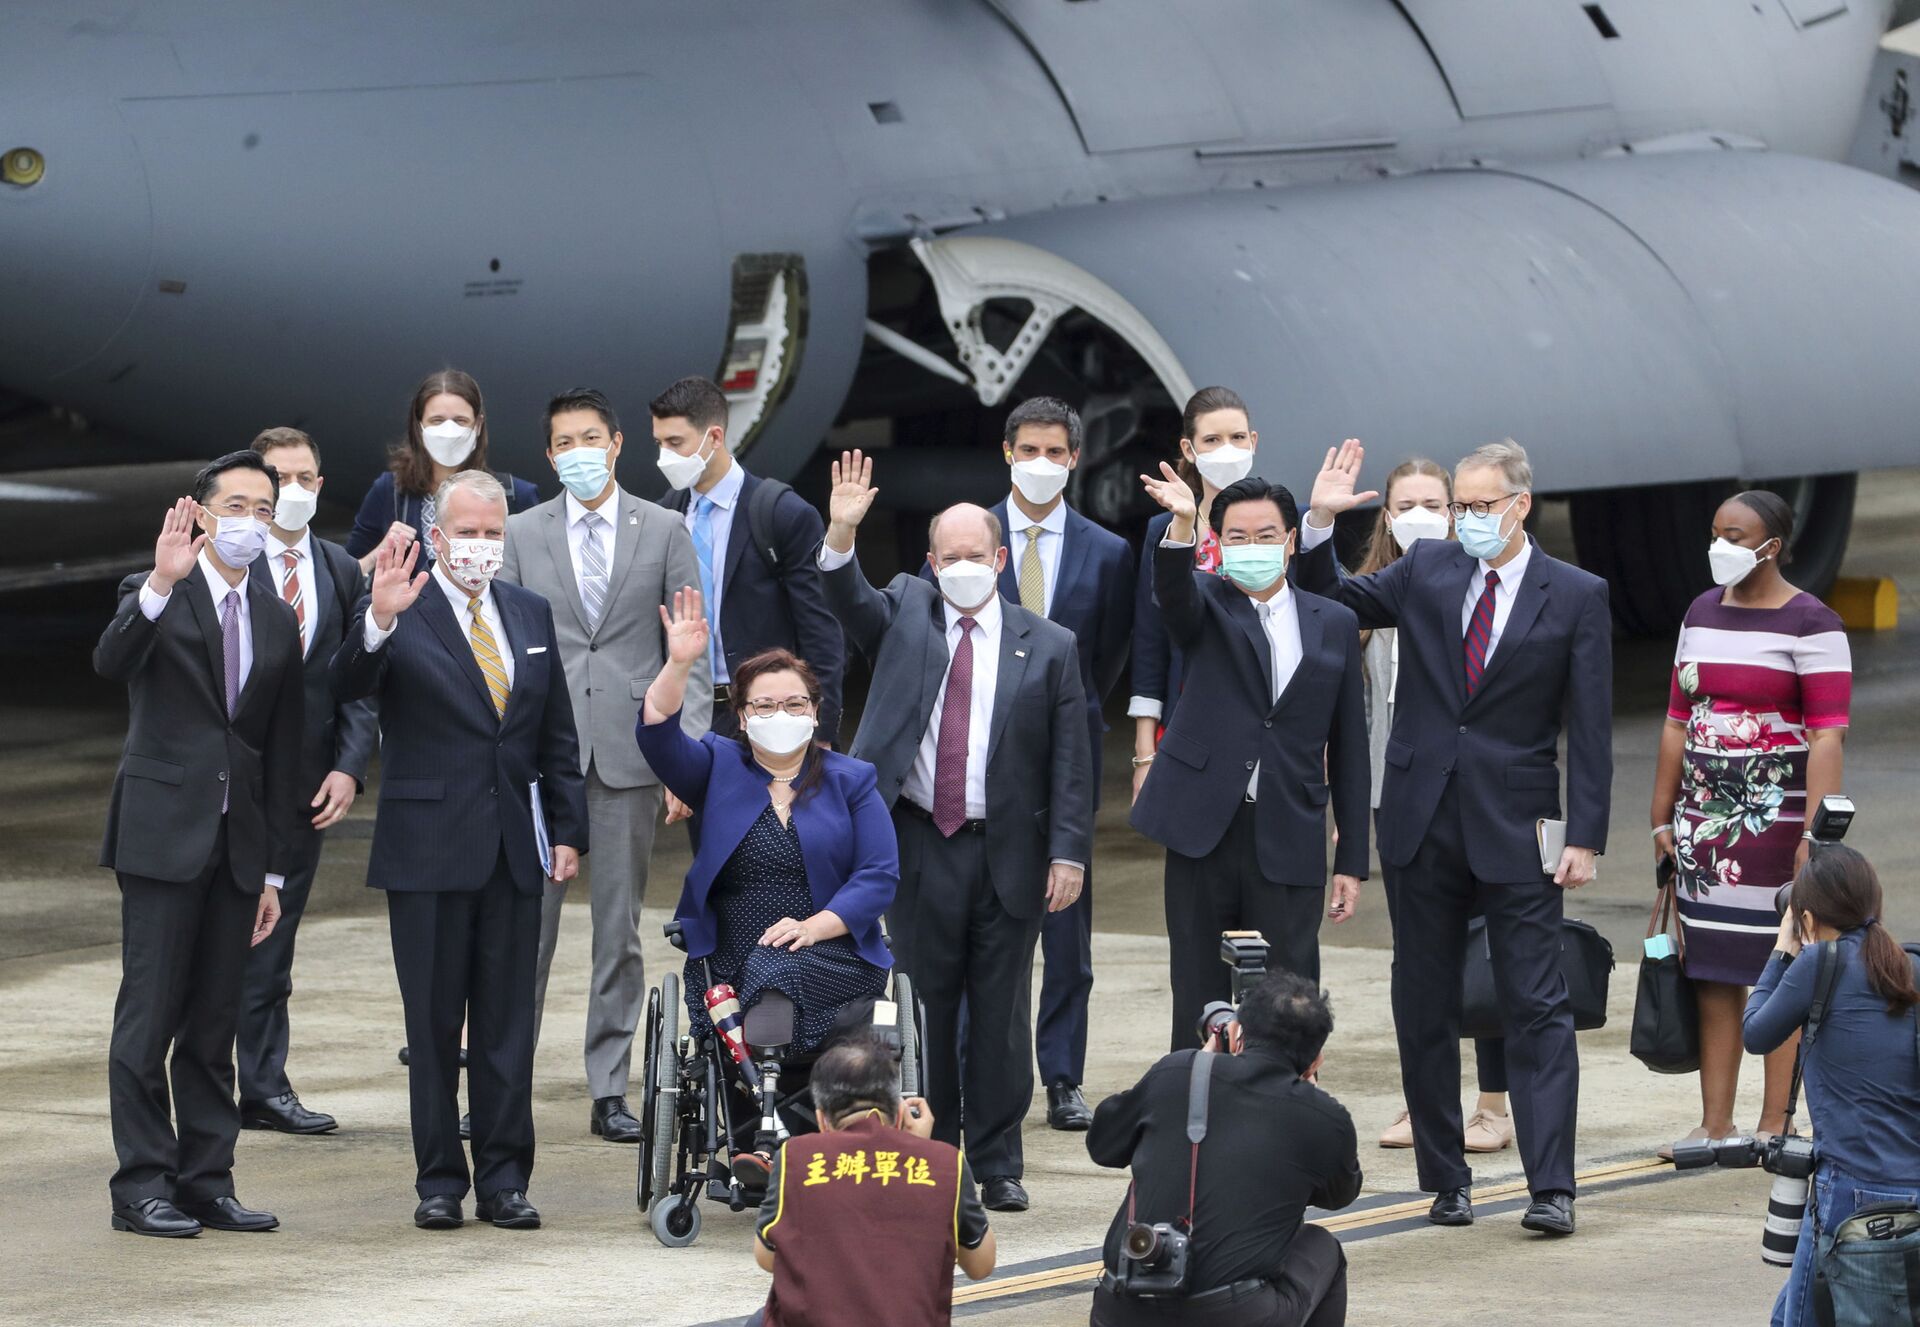 Taiwan's Foreign Minister Joseph Wu, fourth from right, waves with U.S. senators to his right Democratic Sen. Christopher Coons of Delaware, a member of the Foreign Relations Committee, Democratic Sen. Tammy Duckworth of Illinois and Republican Sen. Dan Sullivan of Alaska, members of the Armed Services Committee on their arrival at the Songshan Airport in Taipei, Taiwan on Sunday, June 6, 2021 - Sputnik International, 1920, 16.06.2022